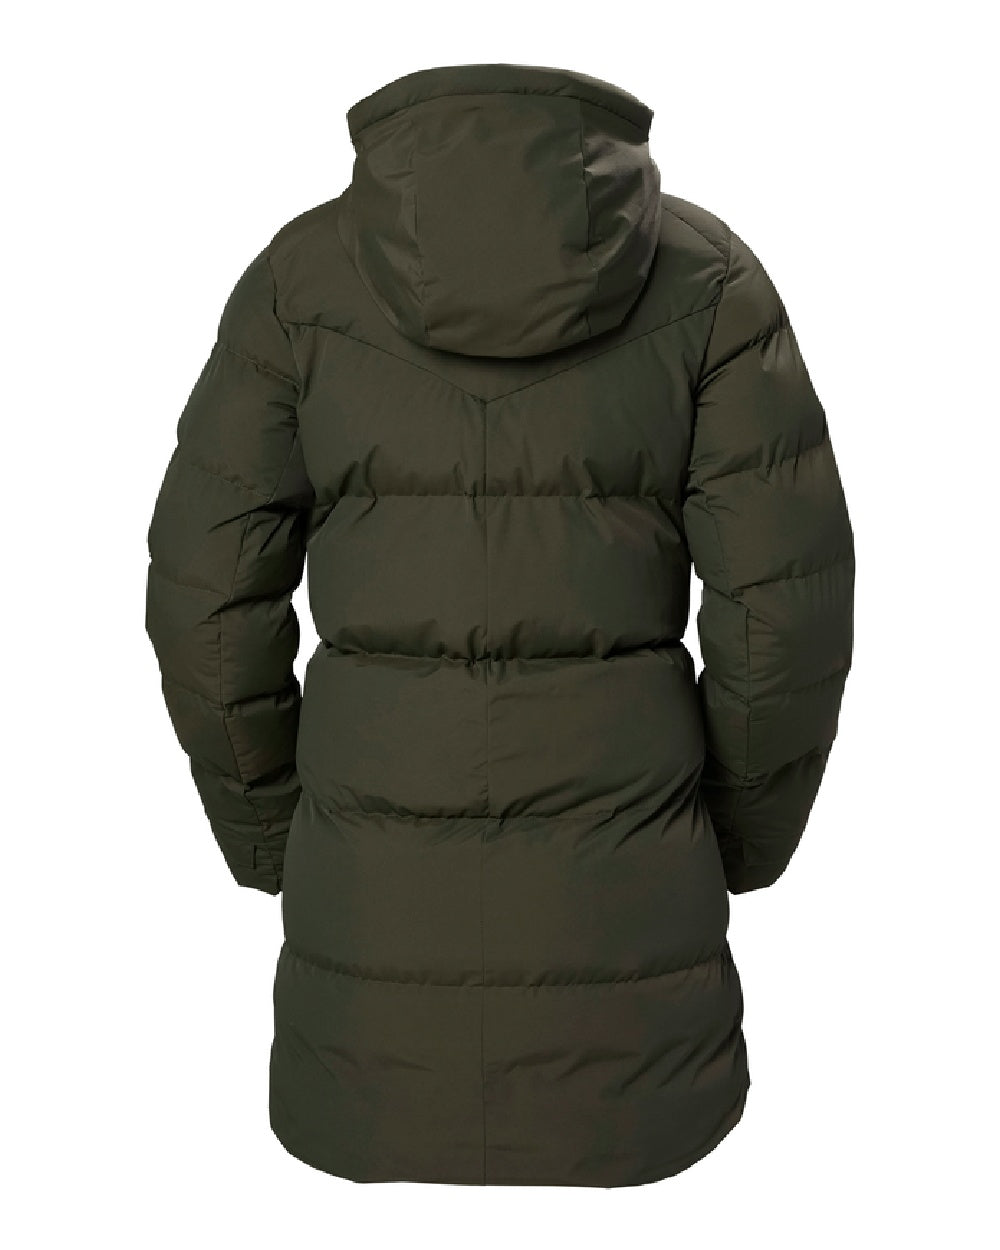 Helly Hansen Adore Ladies Puffy Parka in Utility Green 